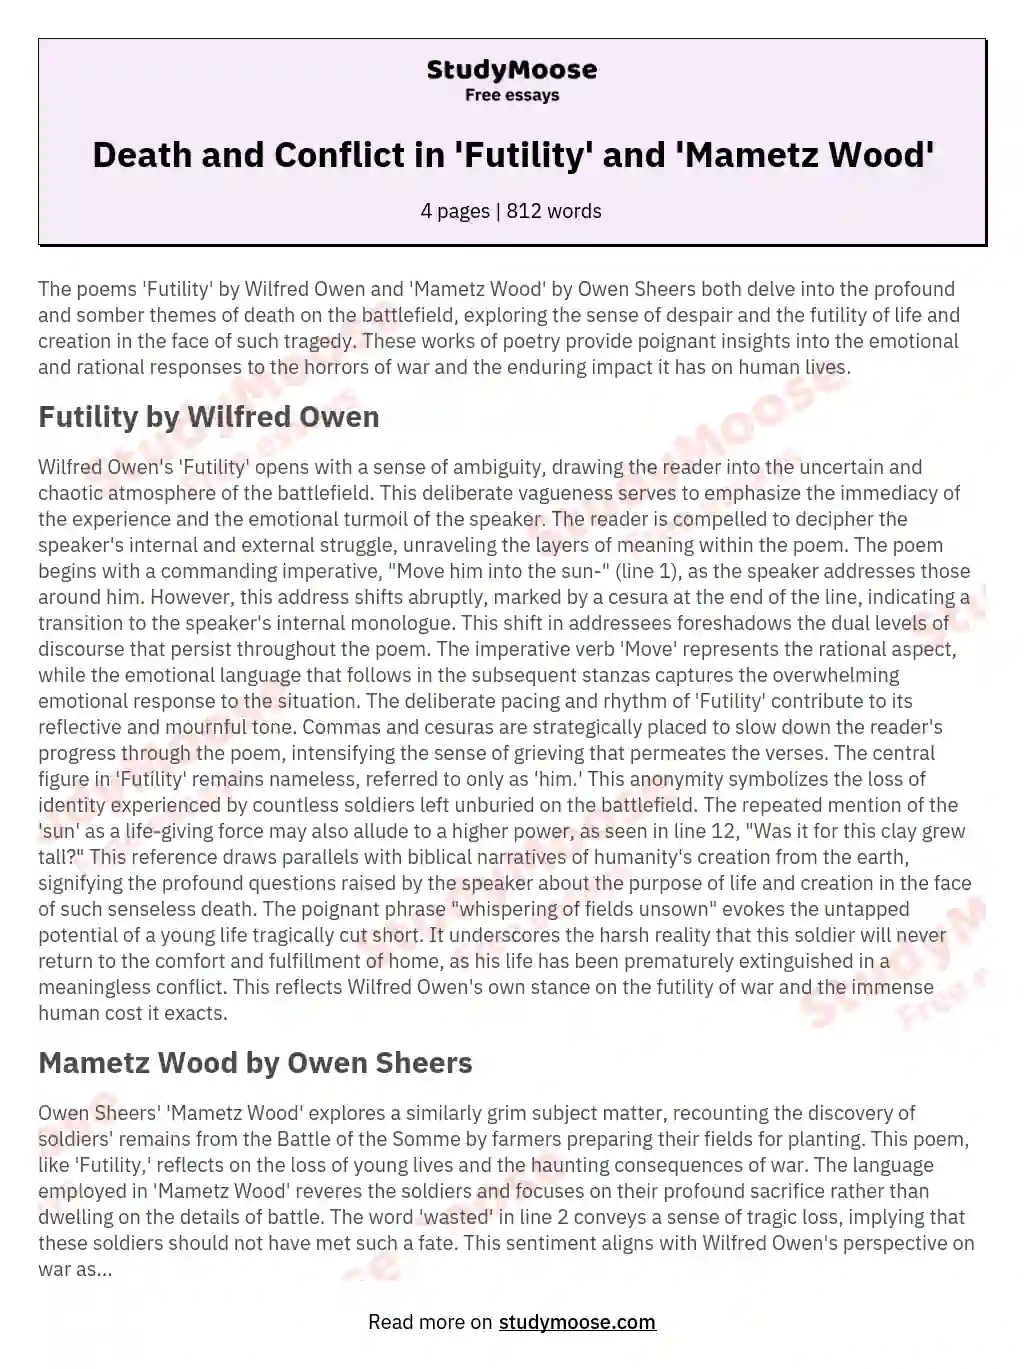 Death and Conflict in 'Futility' and 'Mametz Wood' essay